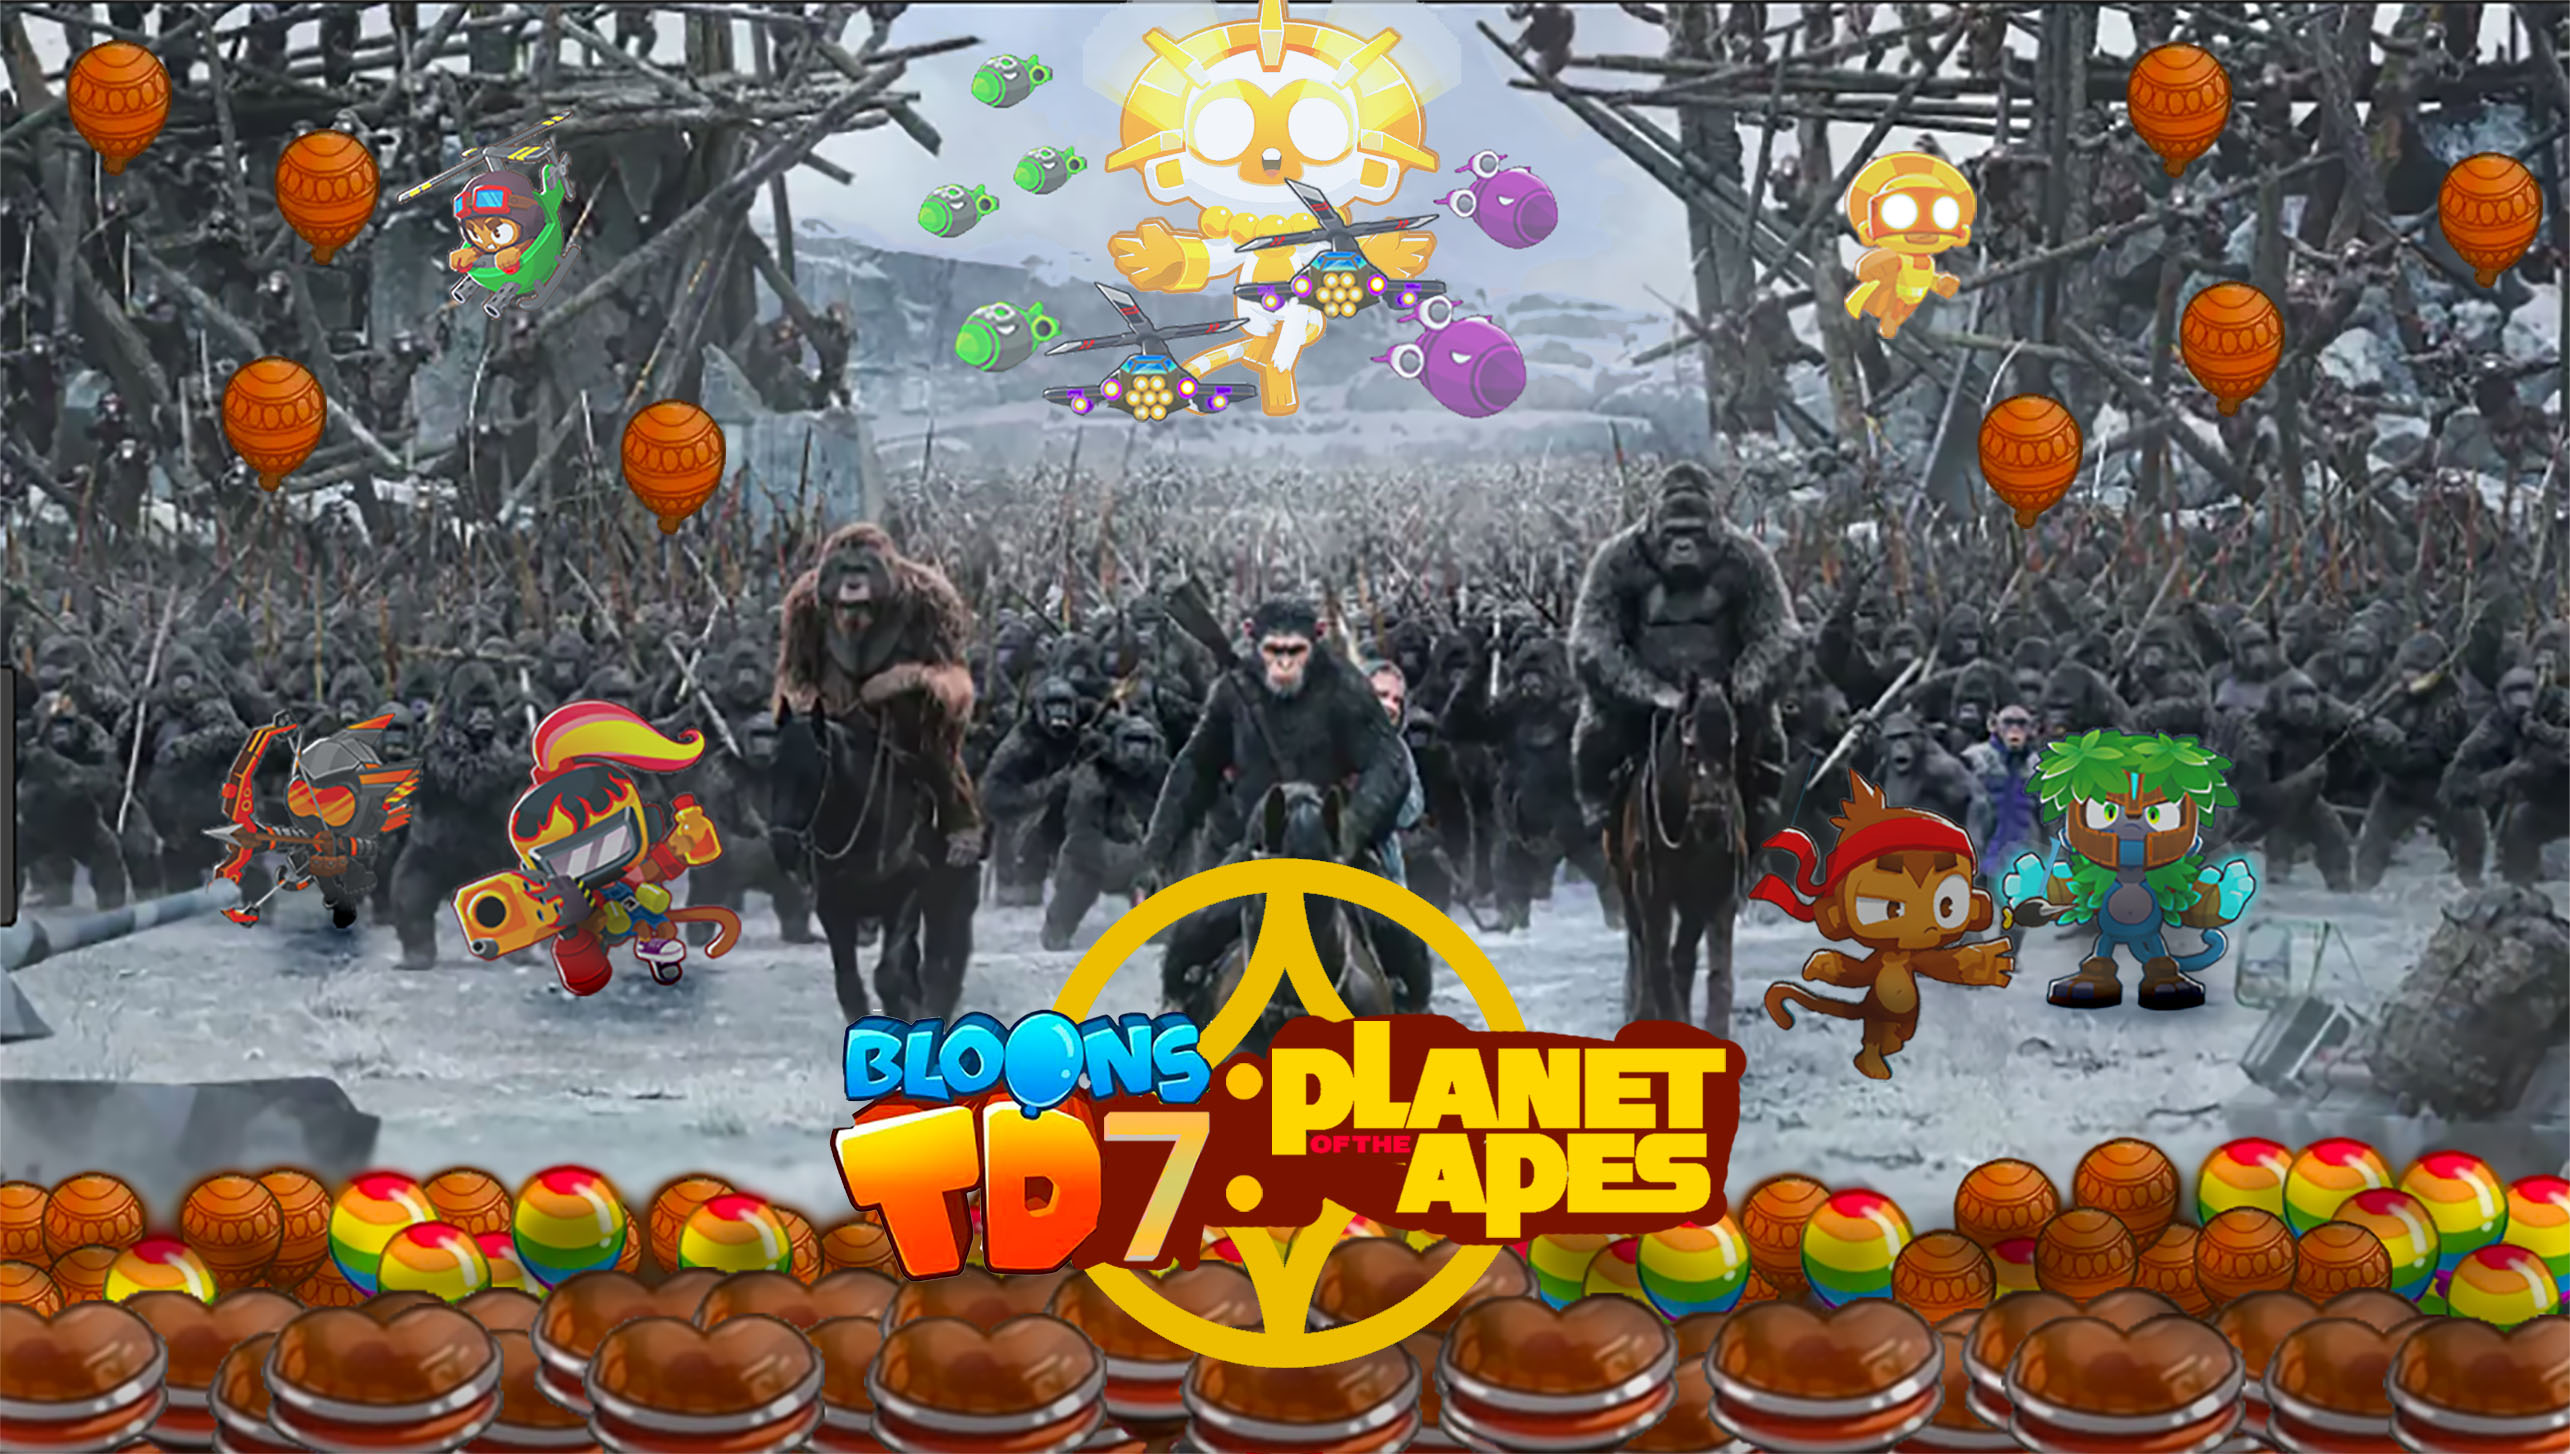 Bloons Tower Defense (BTD) Topic - Discuss Scratch